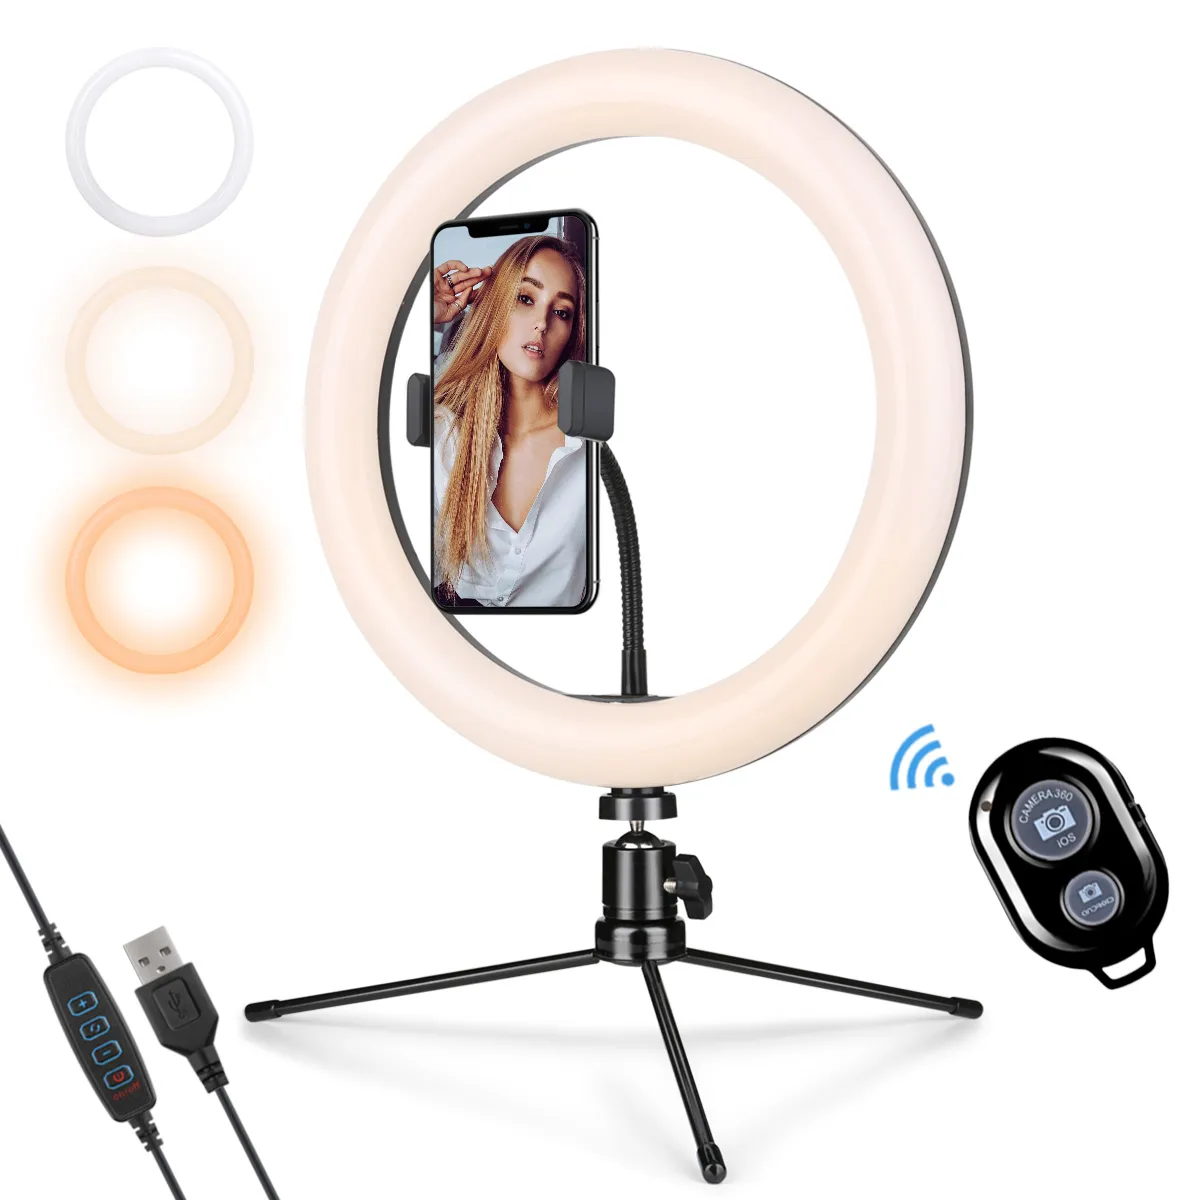 10" Ring Light with Stand and Phone Holder, 10 Inch LED Circle Light for Stream, Selfie, YouTube Videos, Photo Shooting